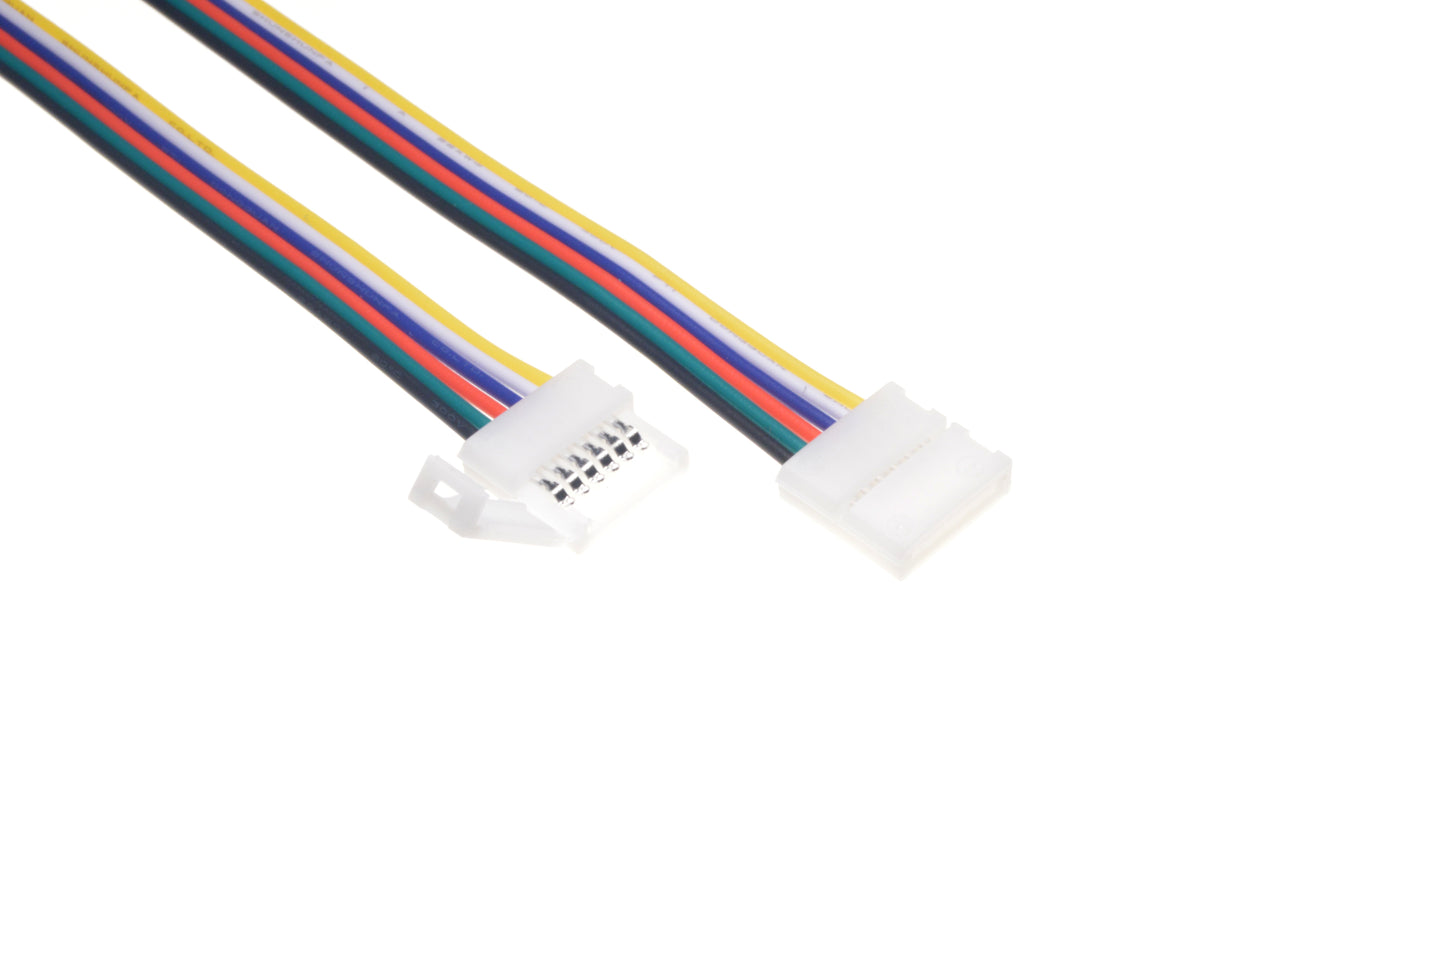 PN 3075 | LED Strip to Wire | Solderless Connector Cable for 5-in-1 LED Strip - 10 PACK